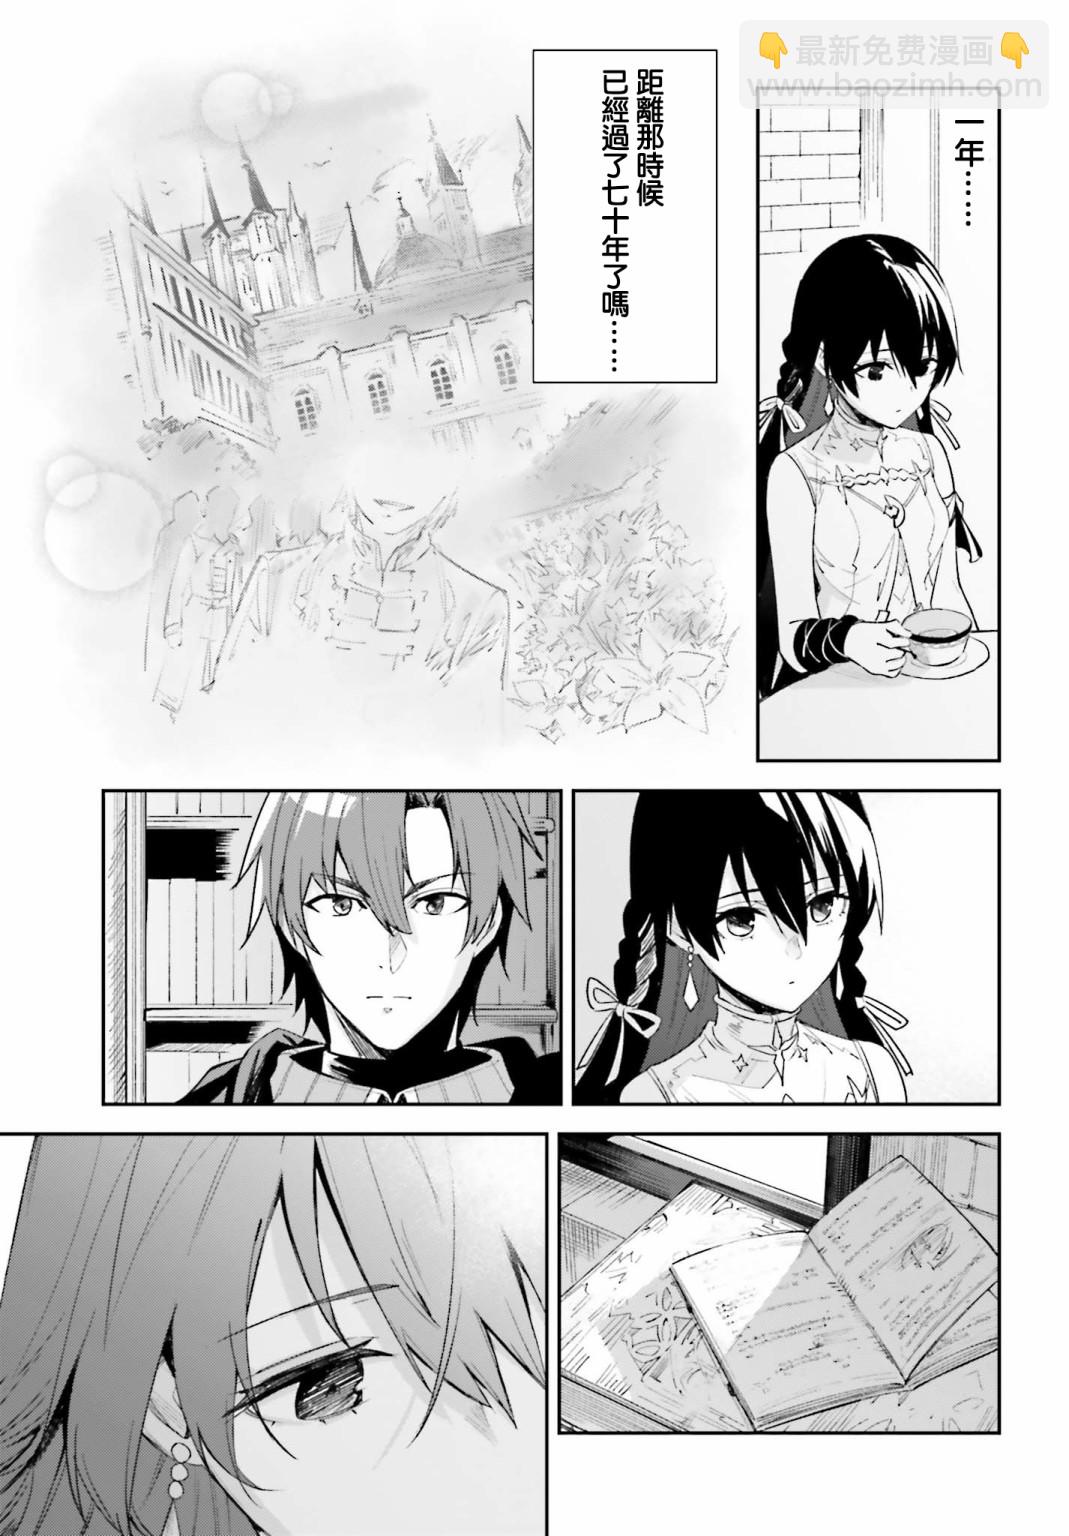 Unnamed Memory - 第01話(2/2) - 2